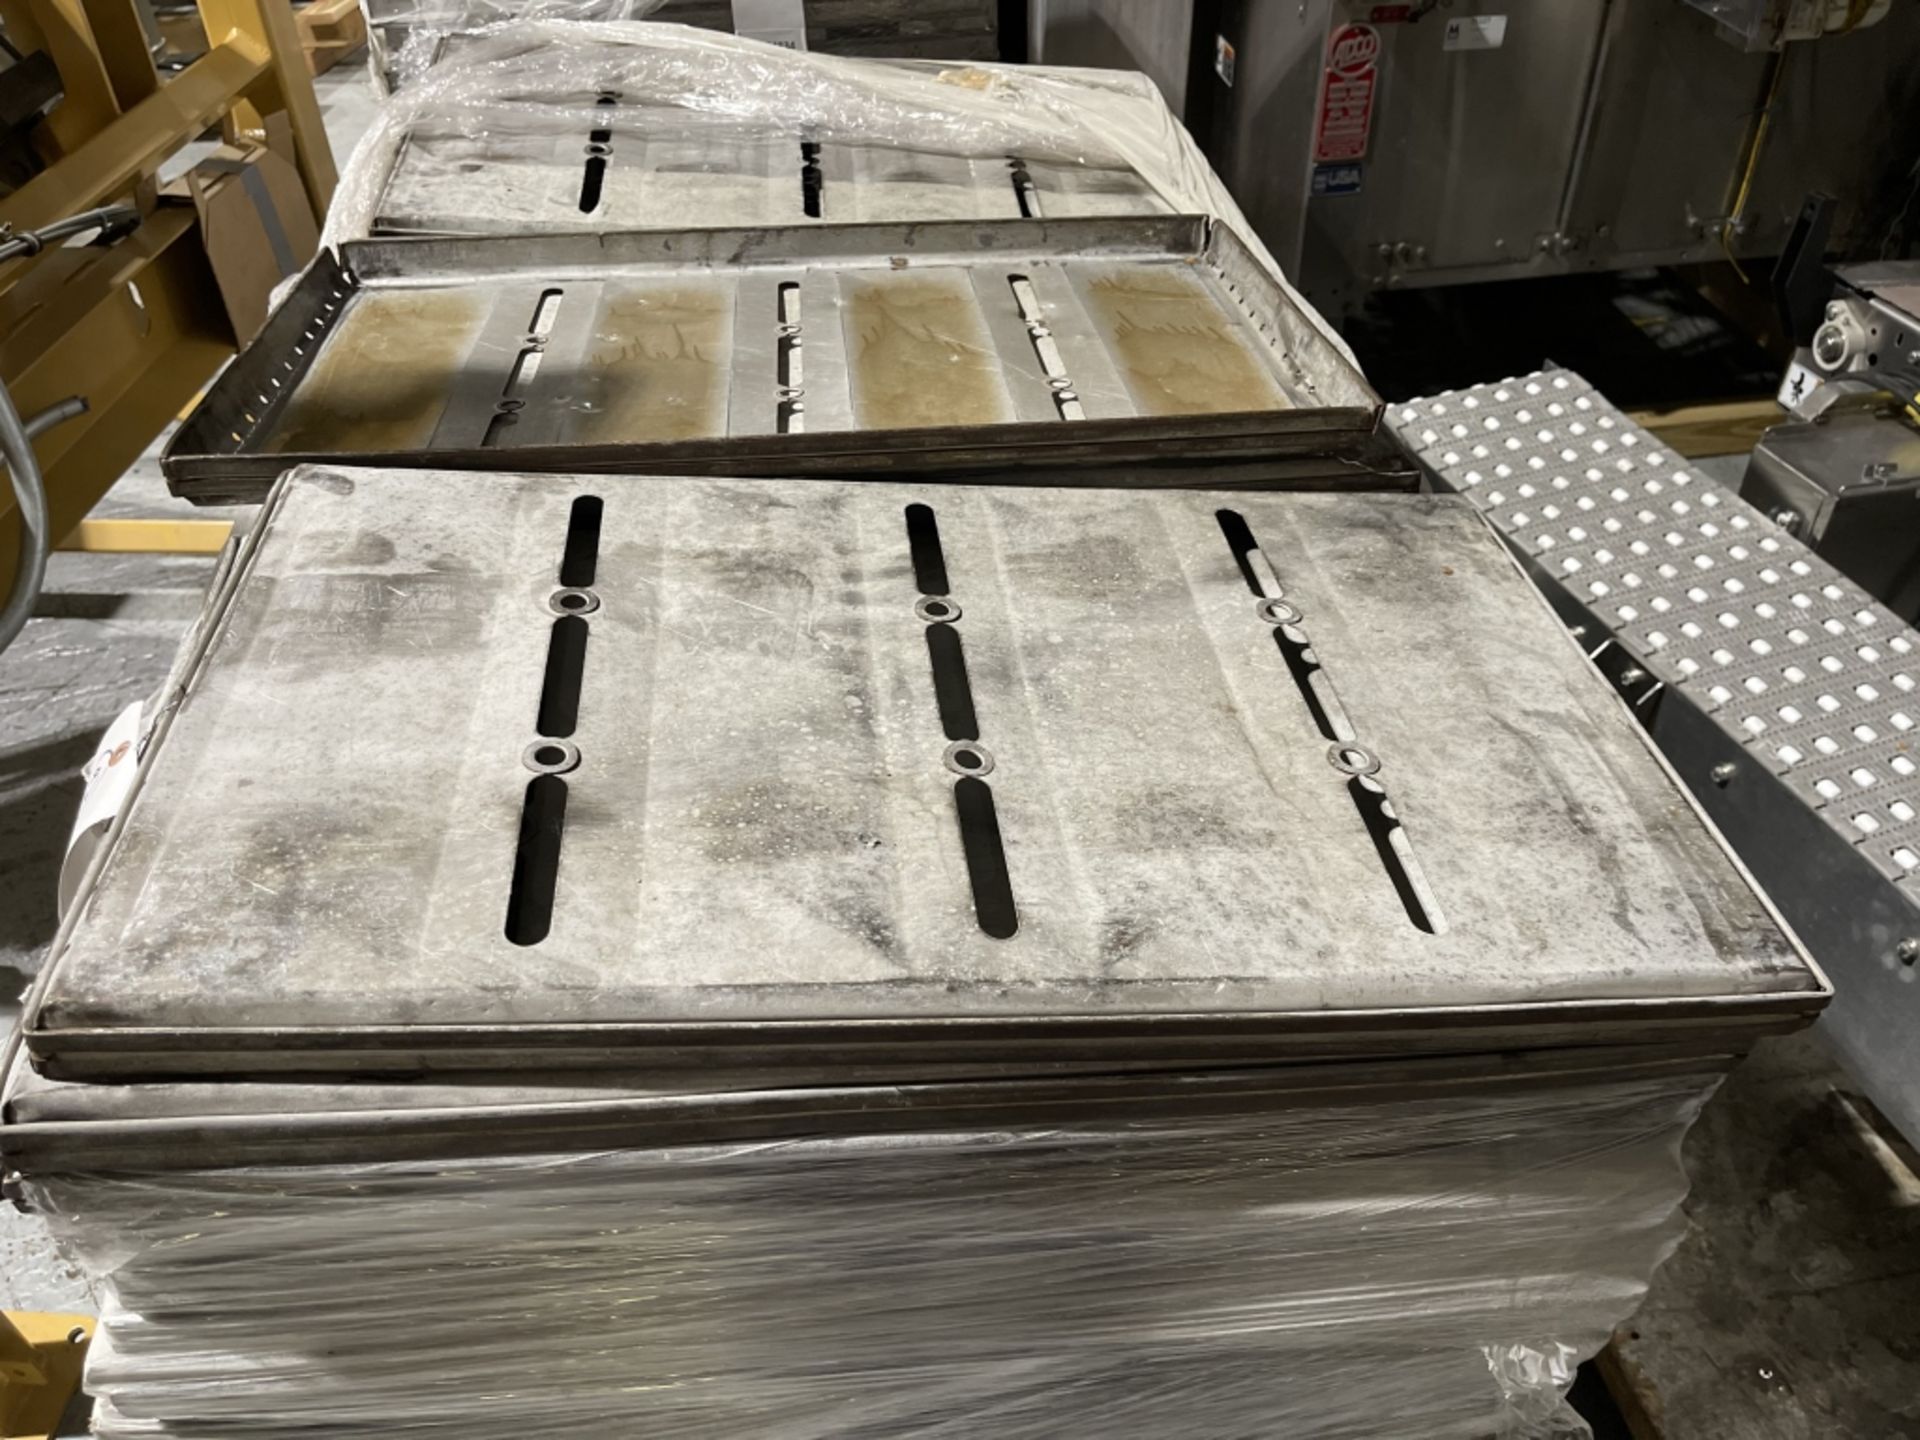 Lot of (90) Baking Pans,With Bottom Punched Holes, 29" L x 16" W (INV#74835)(Located @ the MDG - Image 2 of 2